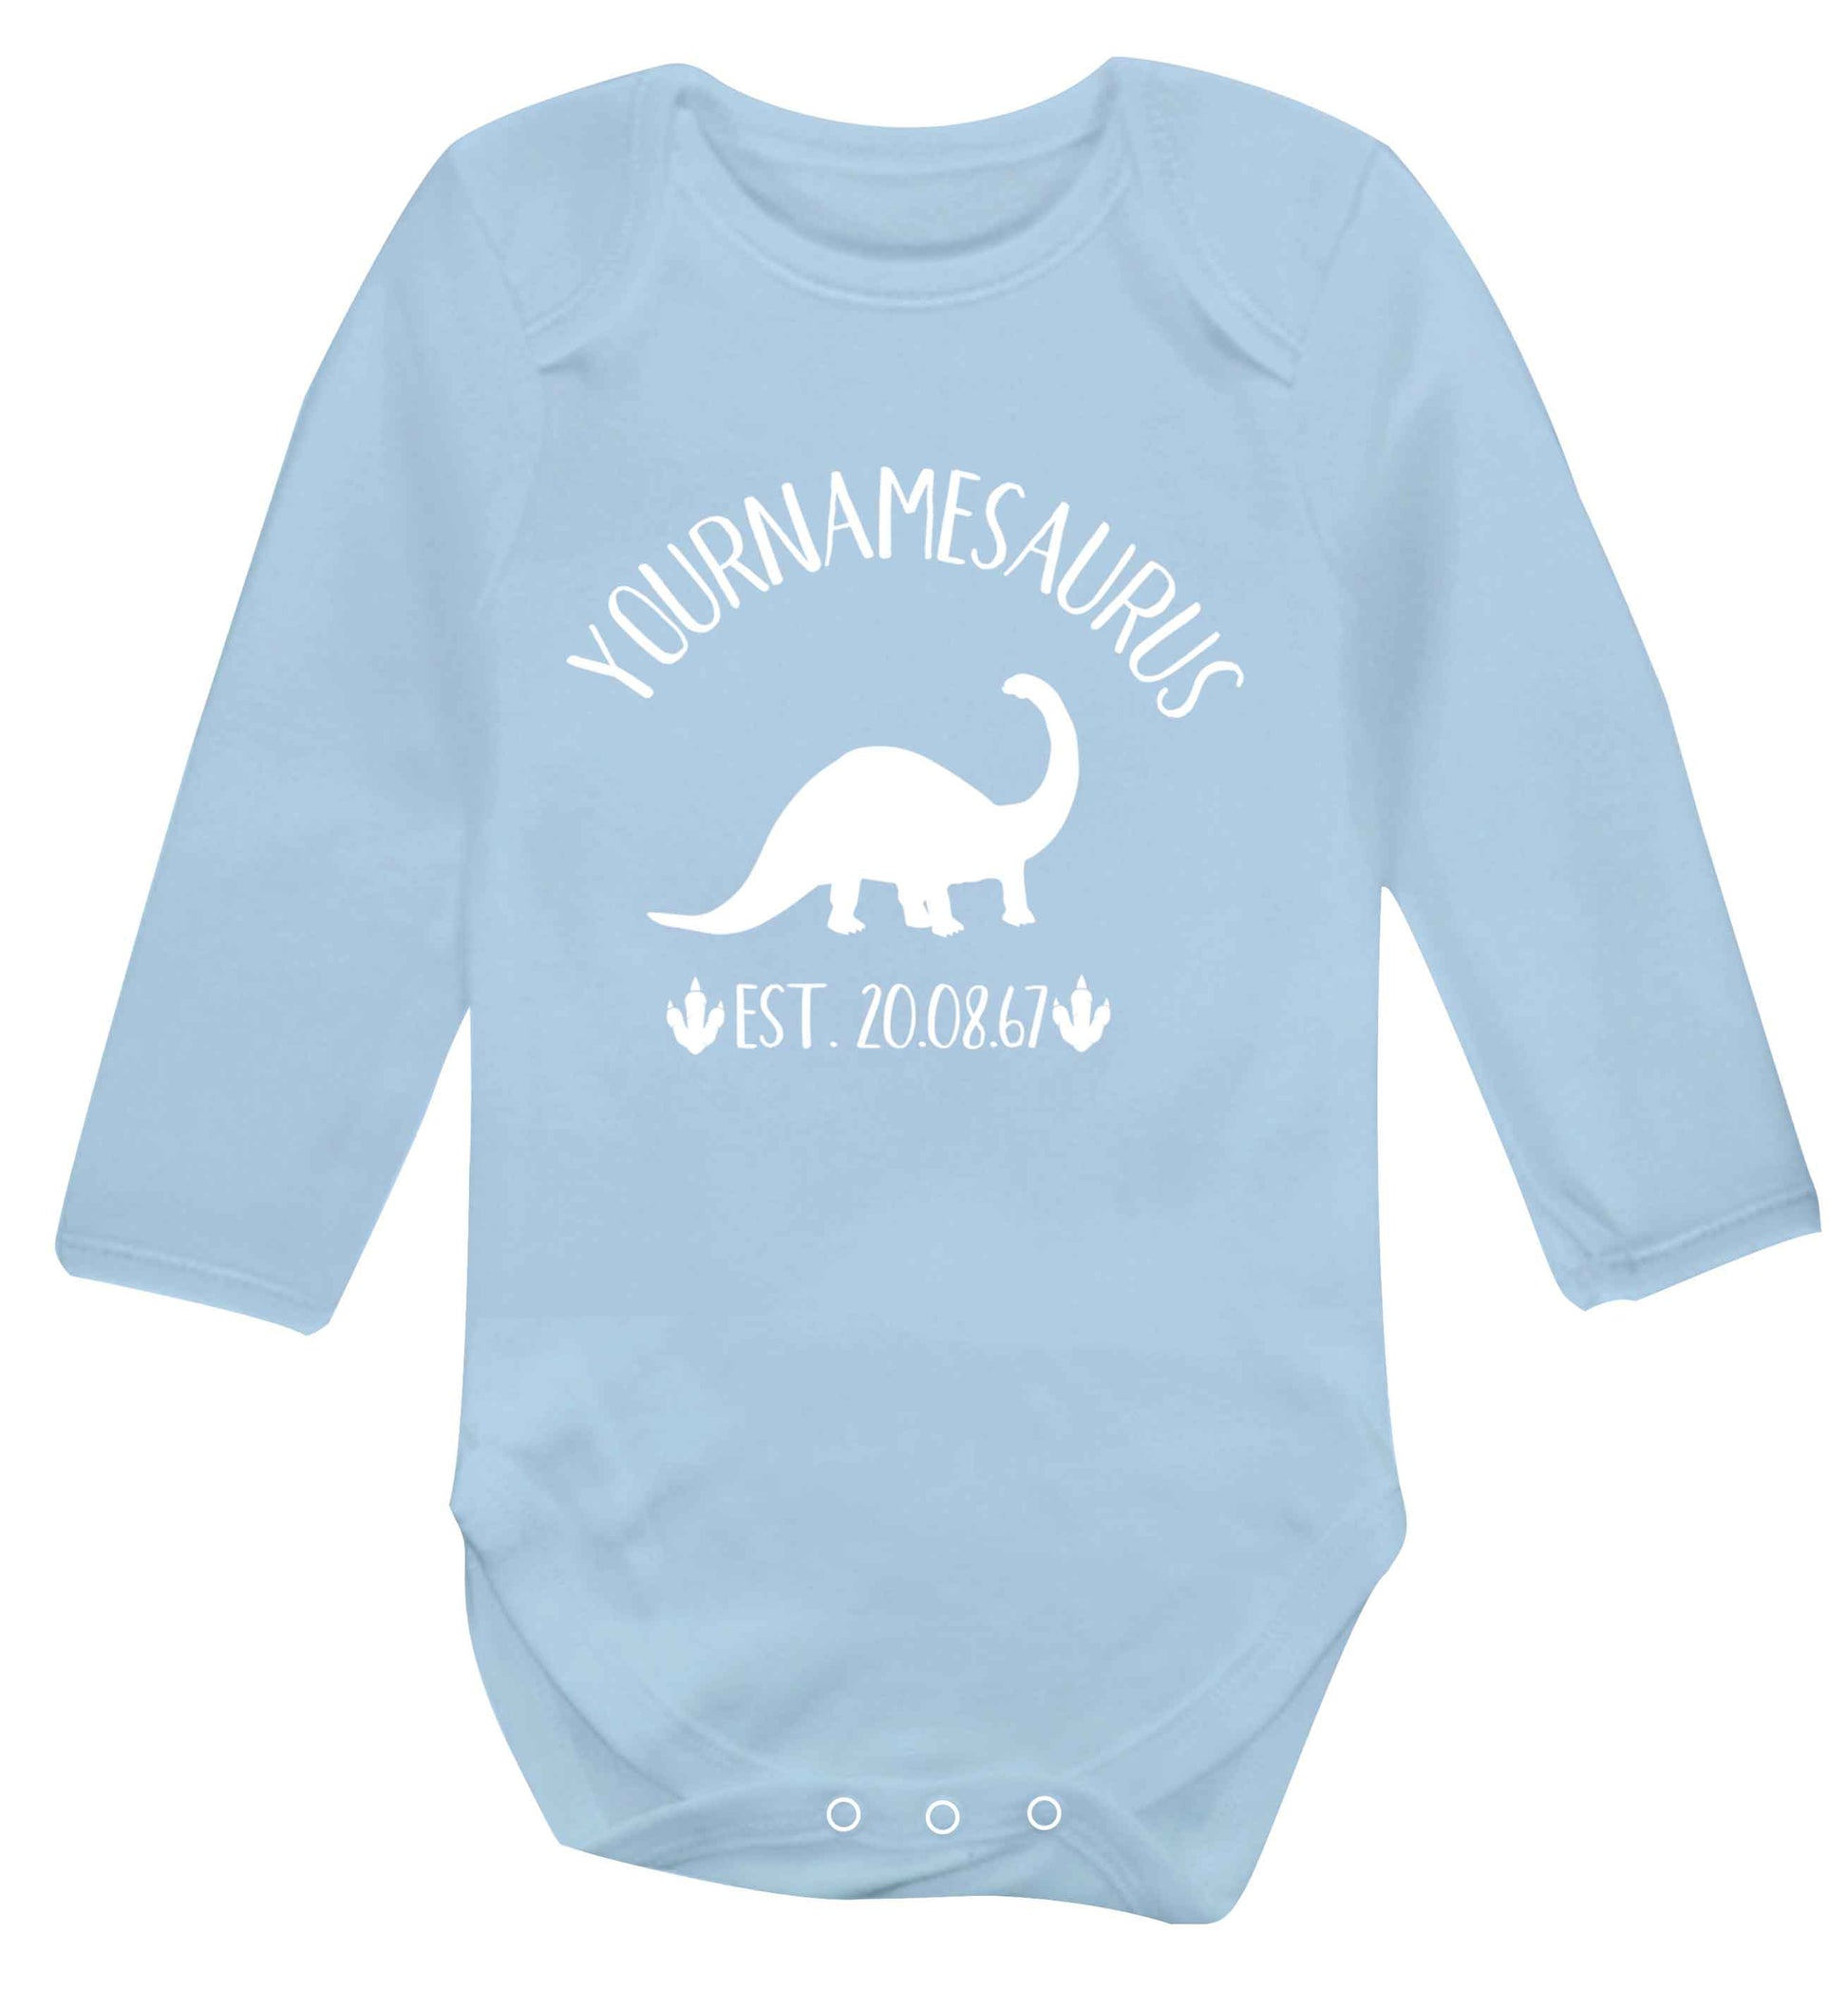 Personalised (your name) dinosaur birthday Baby Vest long sleeved pale blue 6-12 months